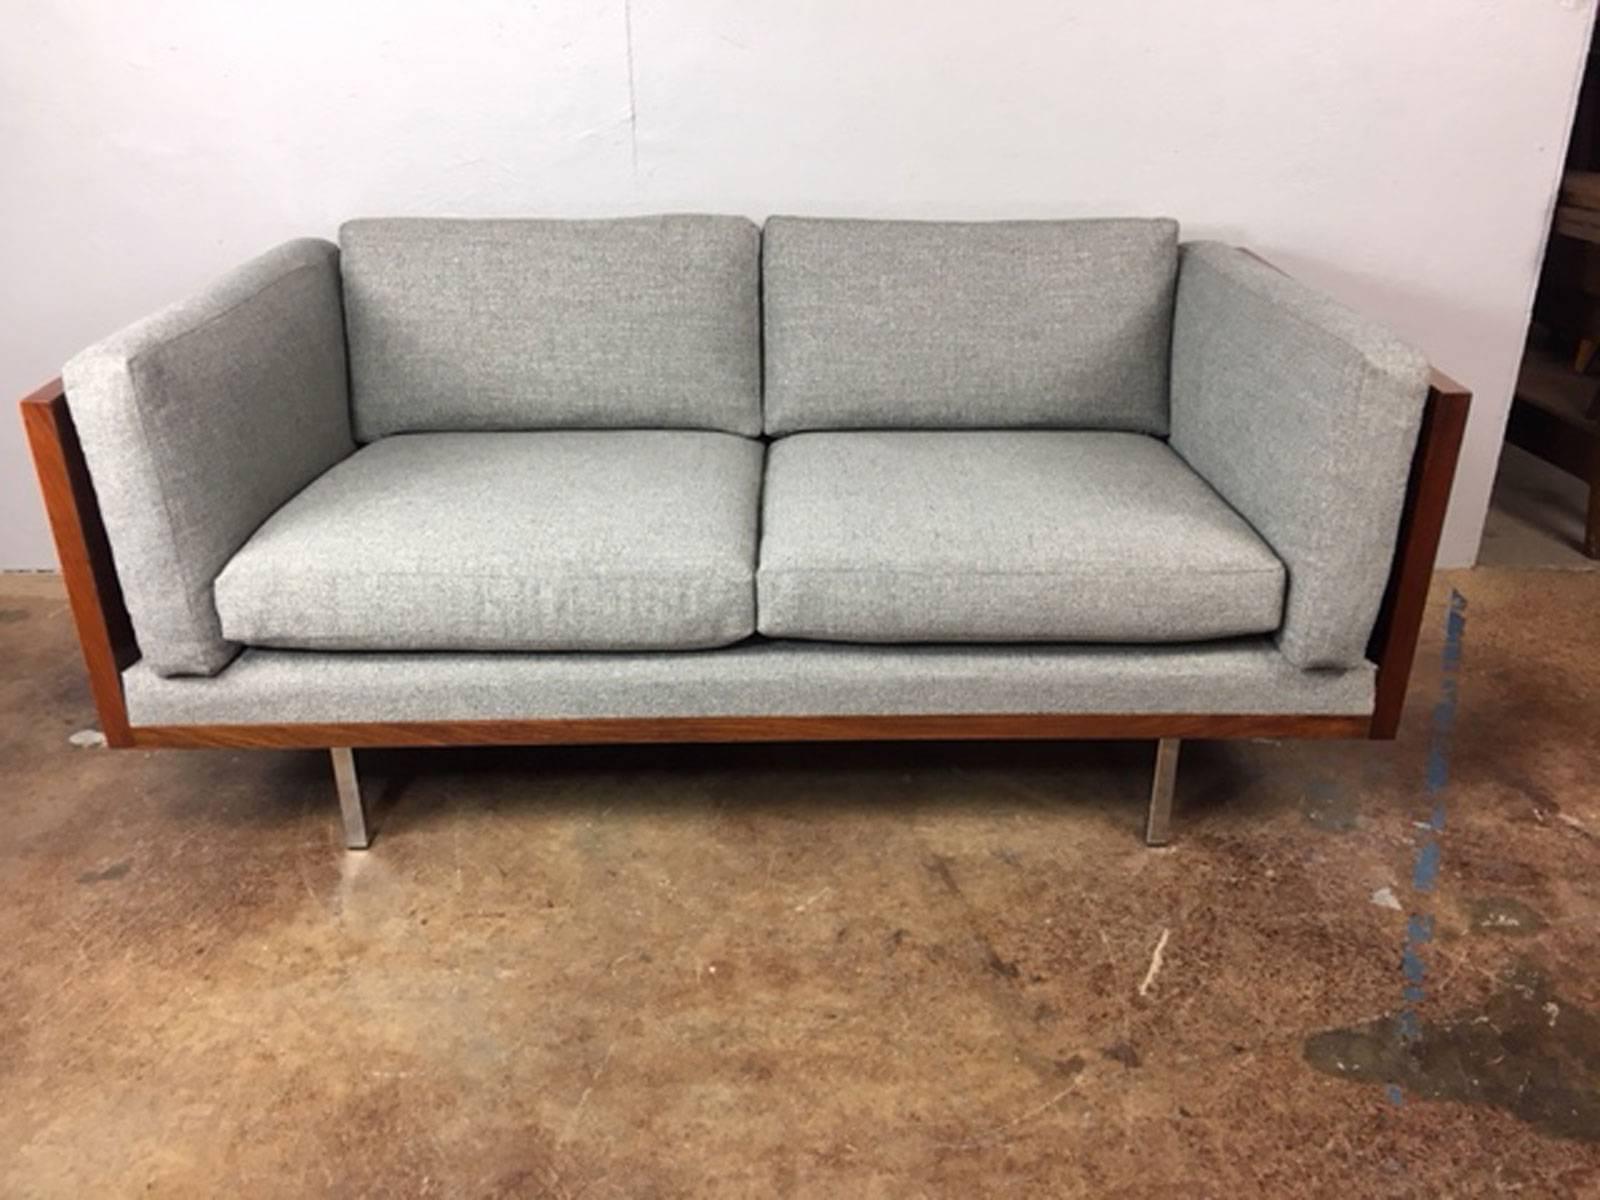 Unique rosewood wrapped low back sofa with chrome legs by Komfort of Denmark. Rare.  New upholstery.  Circa 1970s.  